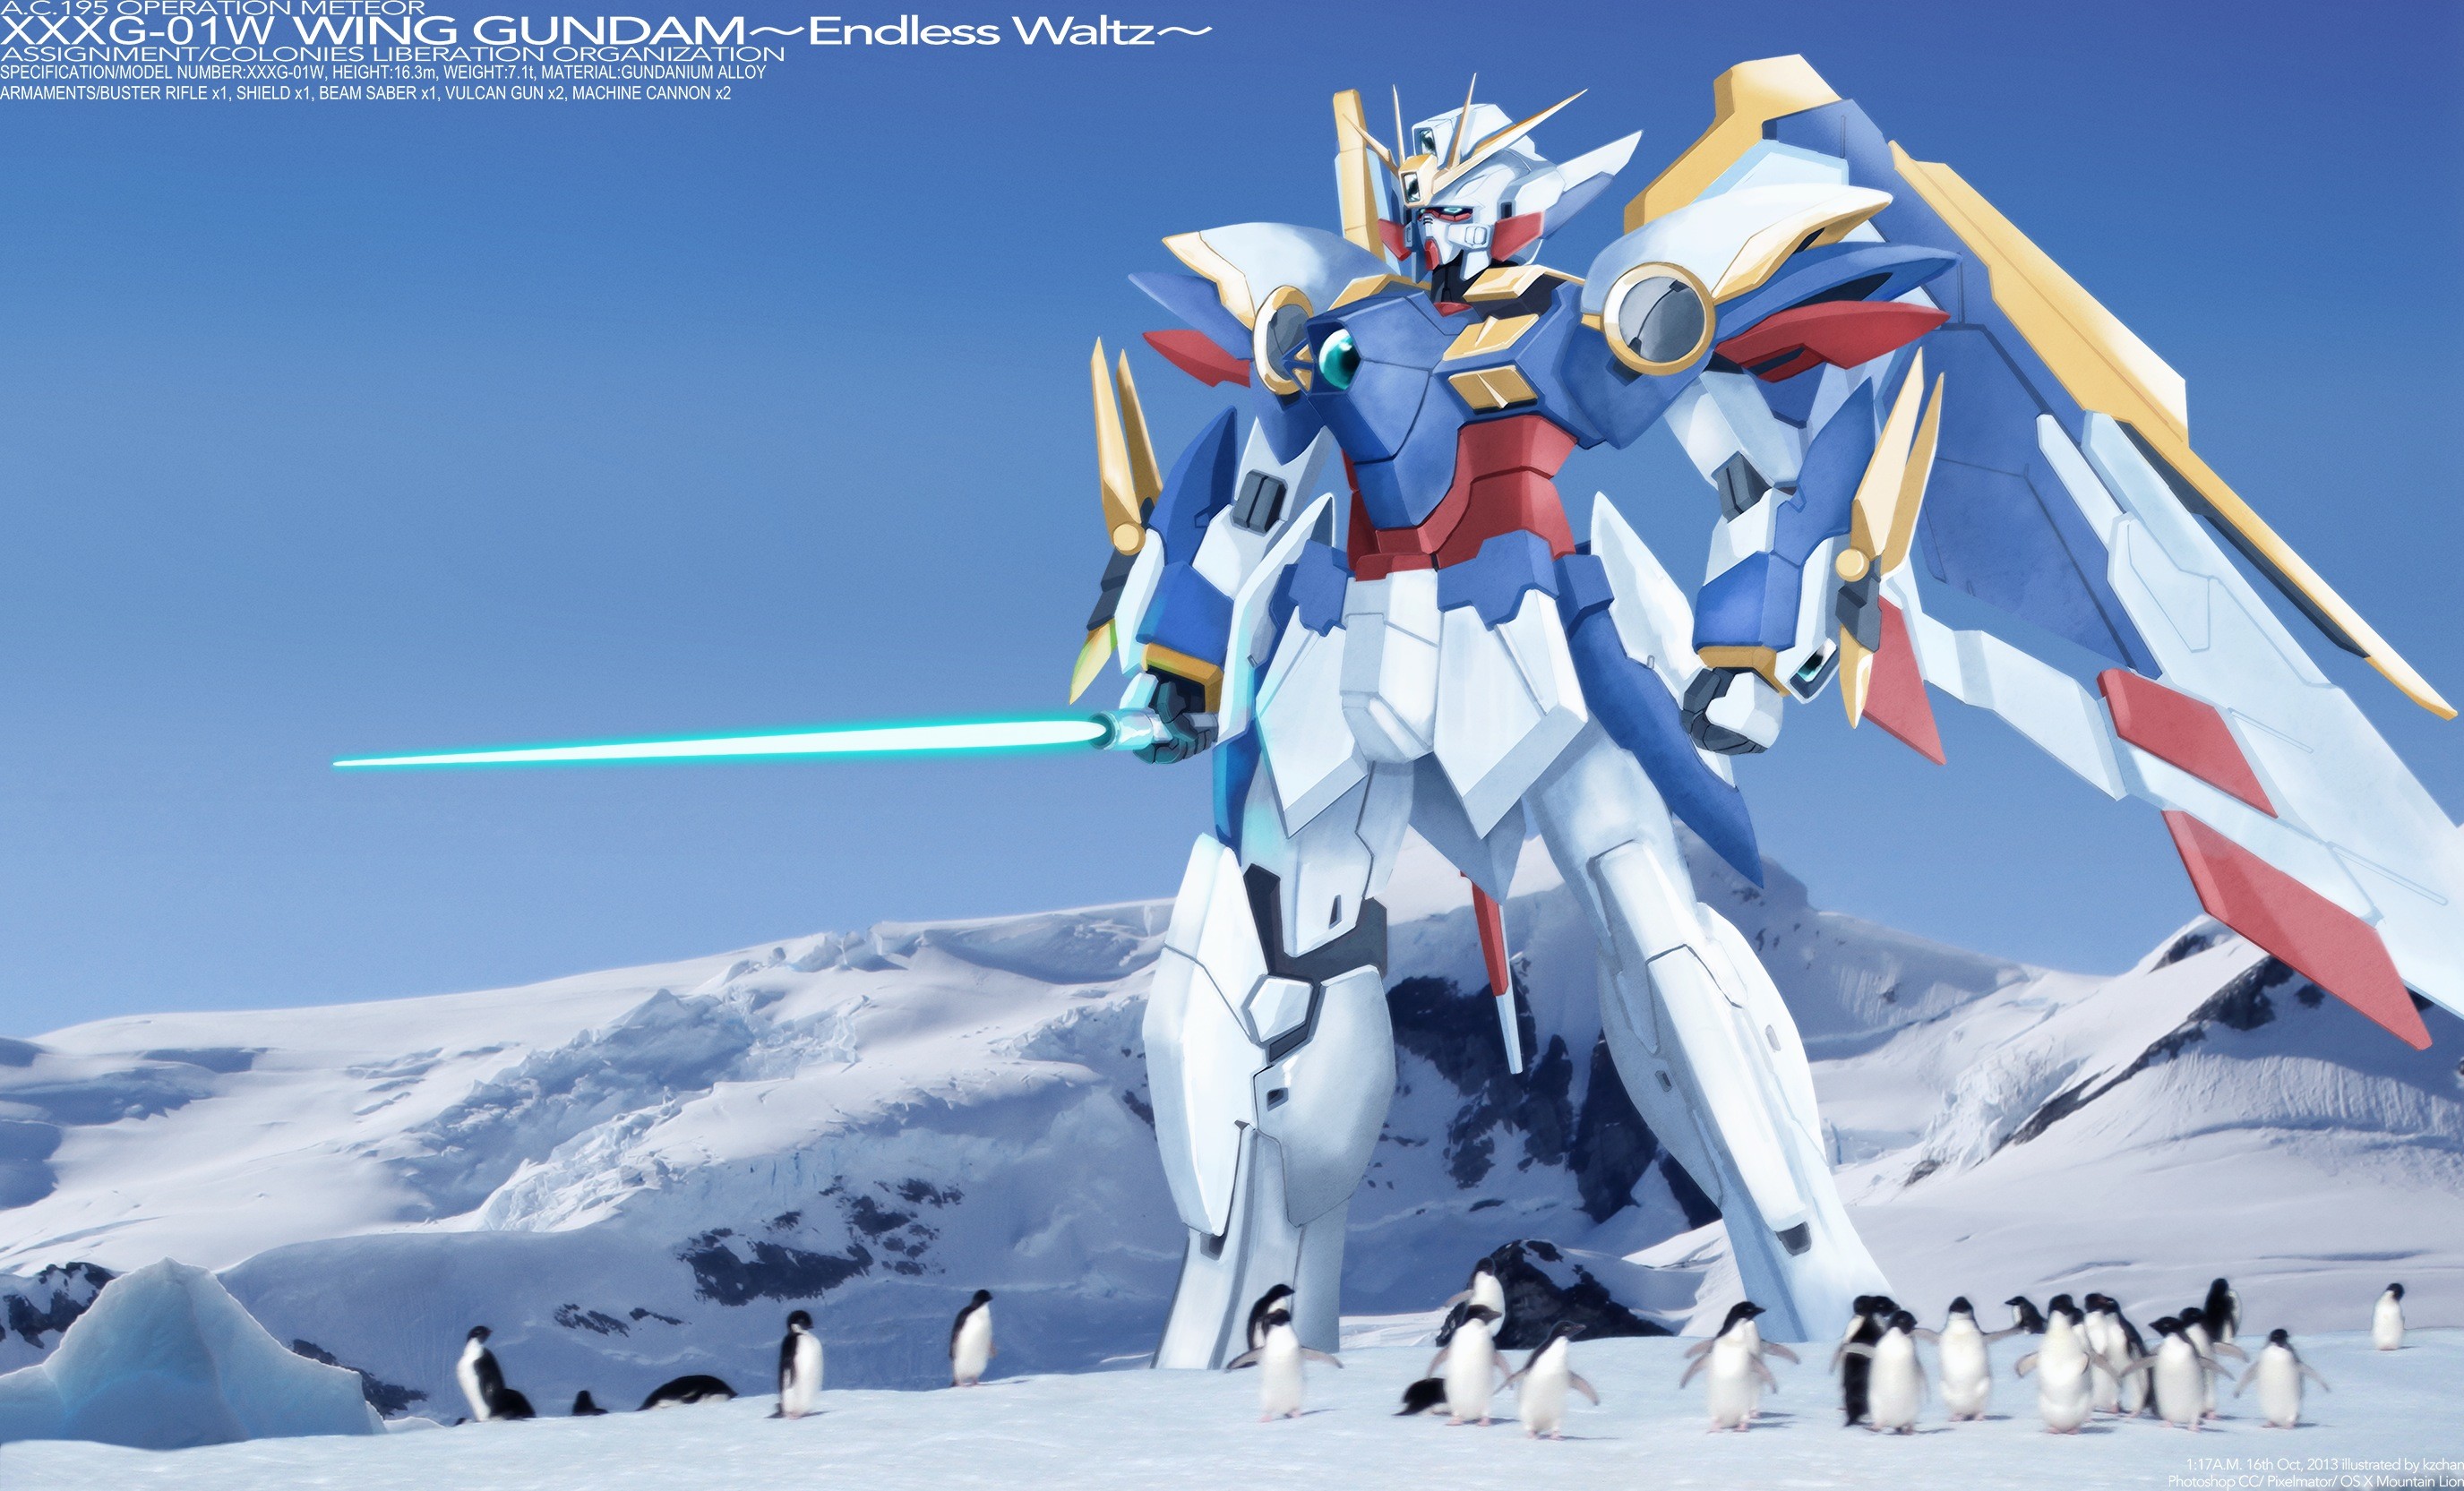 2751x1665 Wallpaper of Wing Gundam hanging out with some Penguins